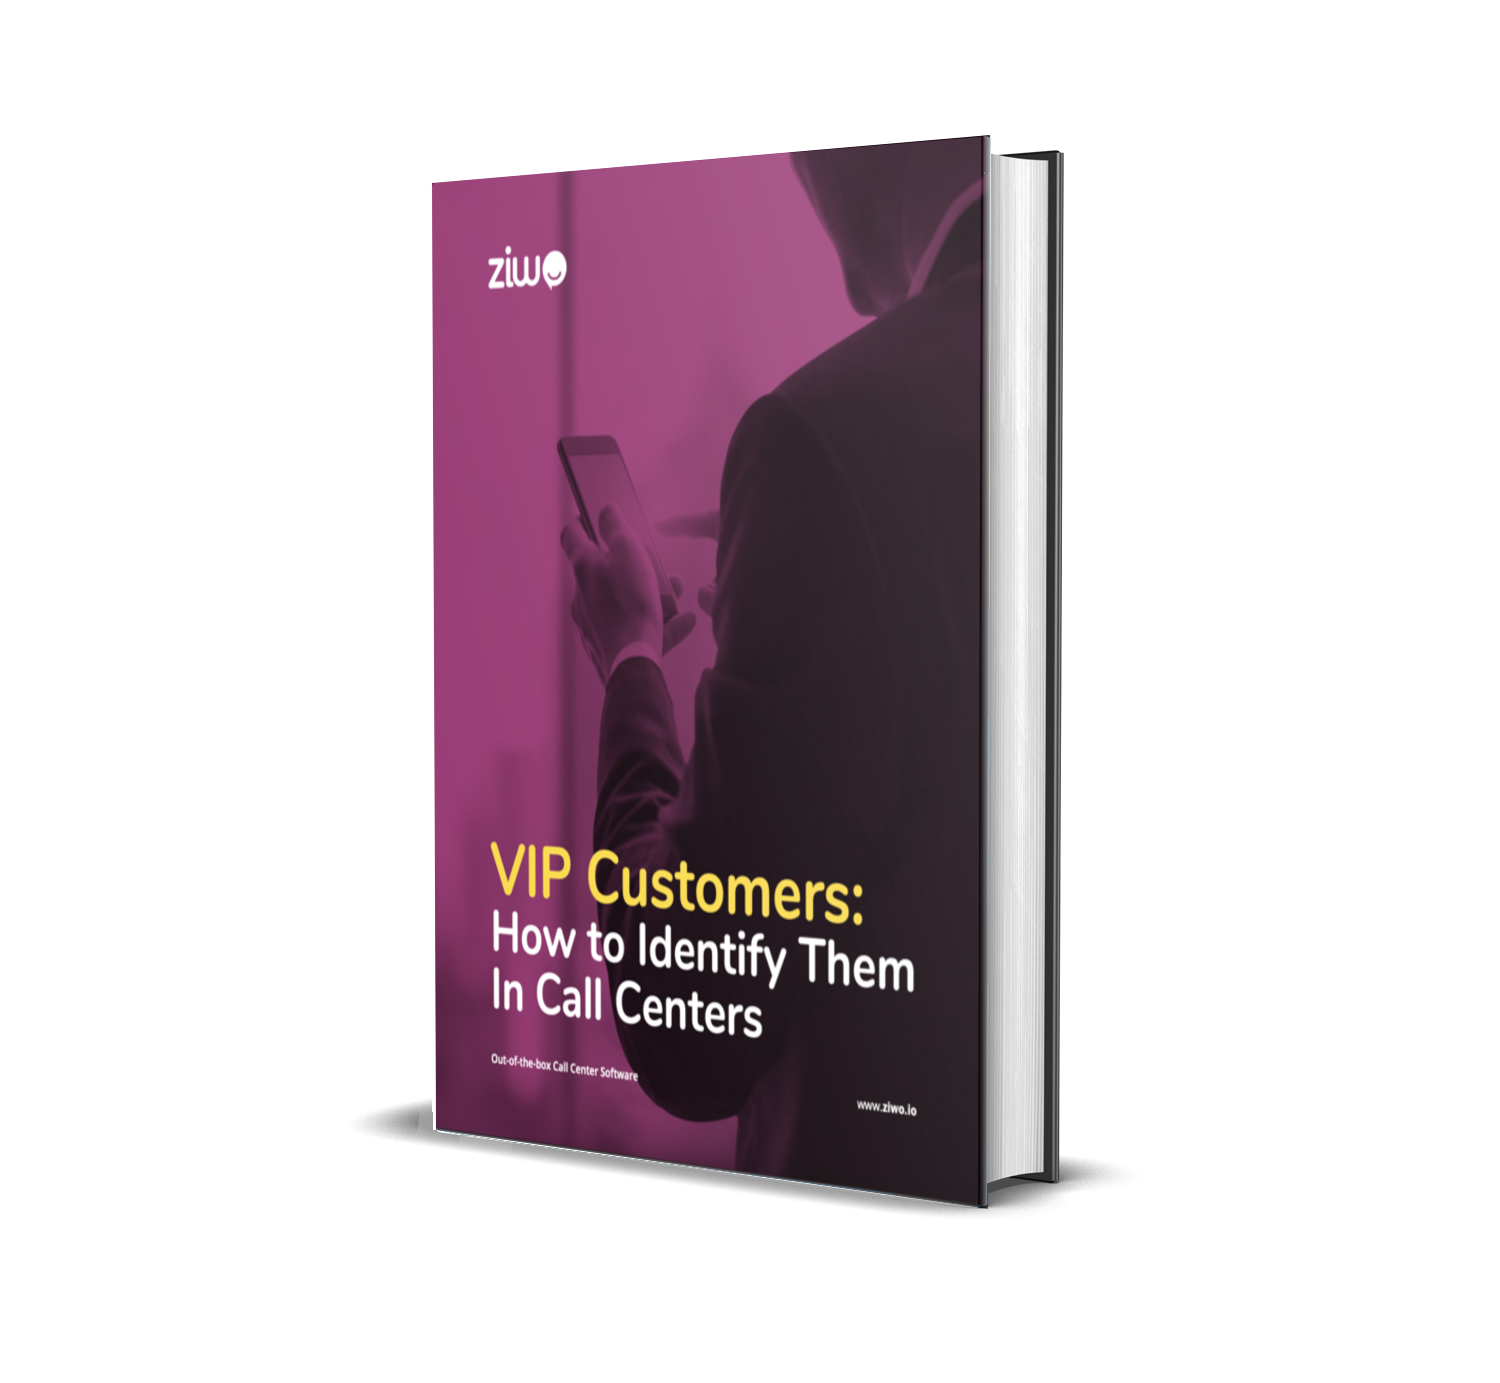 A book with a title "VIP Customers: How to Identify them in Call Centers"